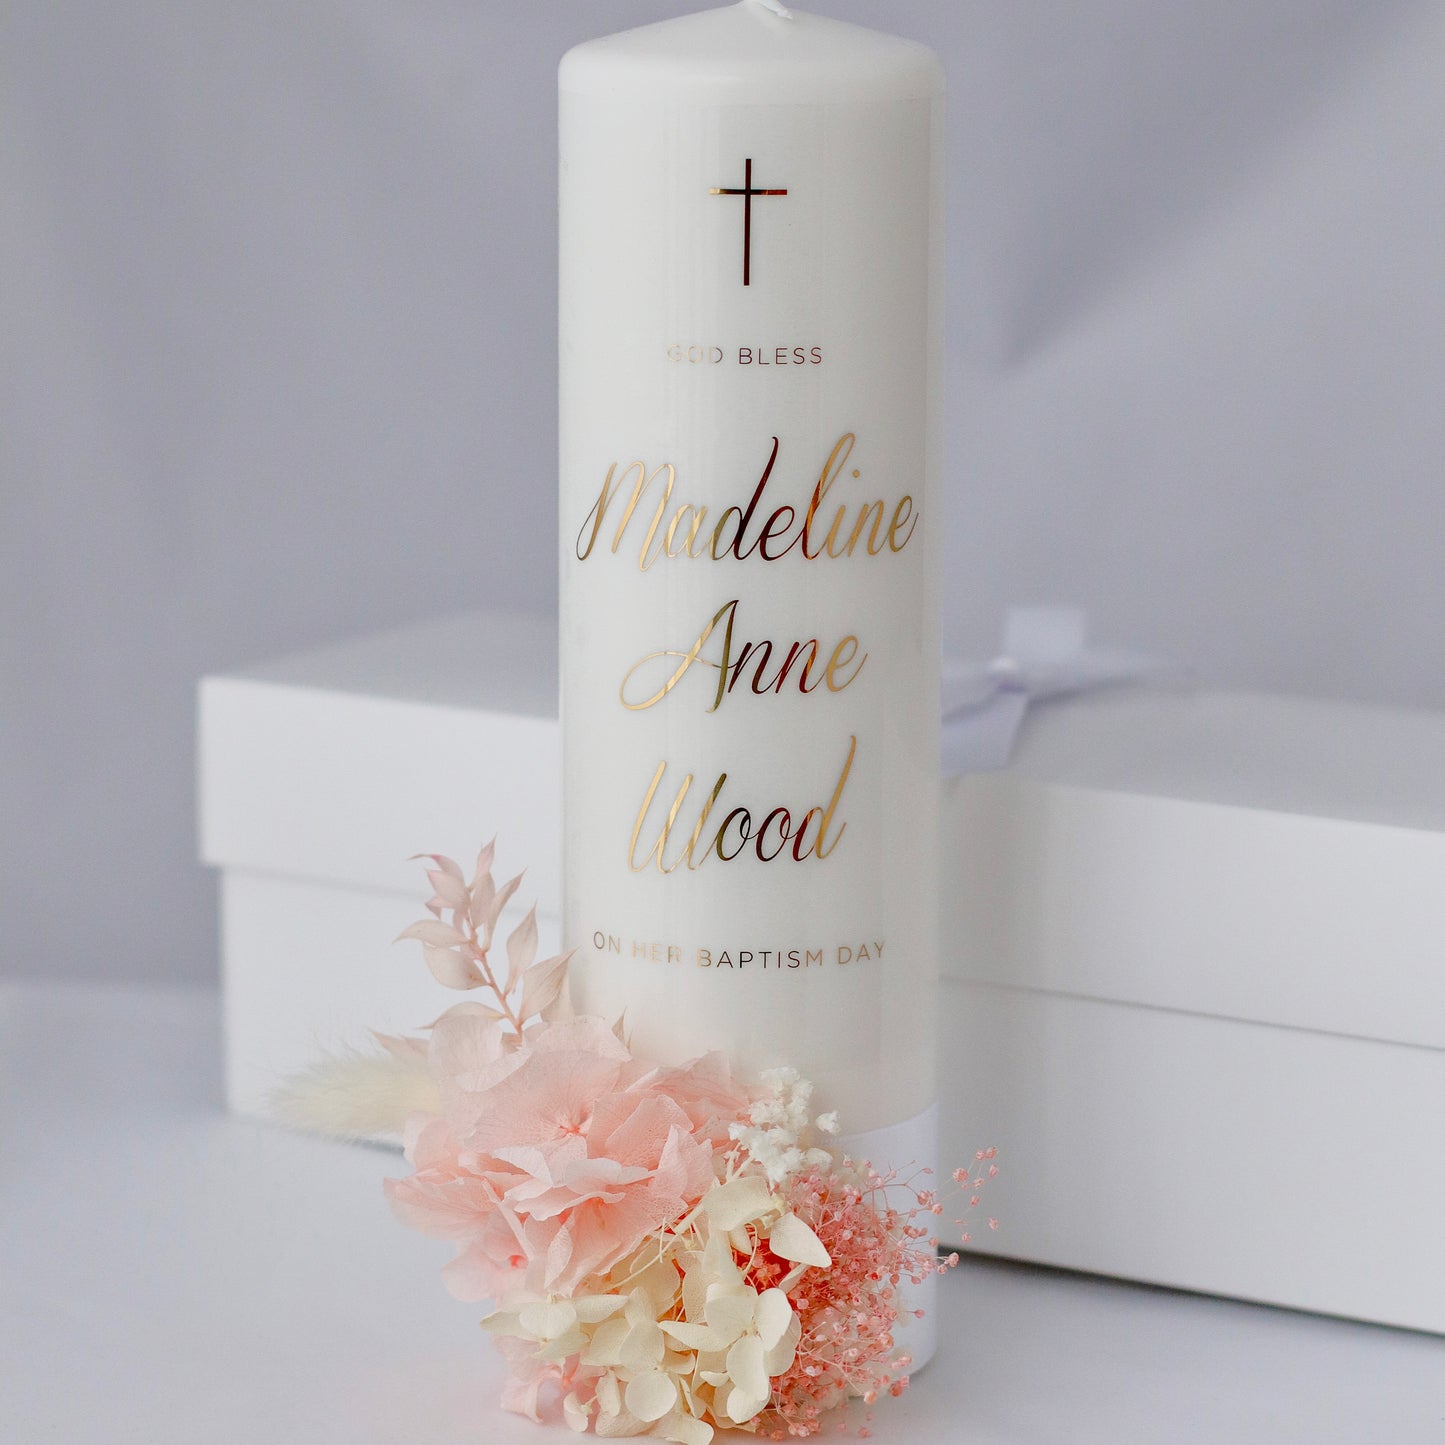 Preserved Floral Candle - The candle comes with an optional personalised display box, made to match the candle.